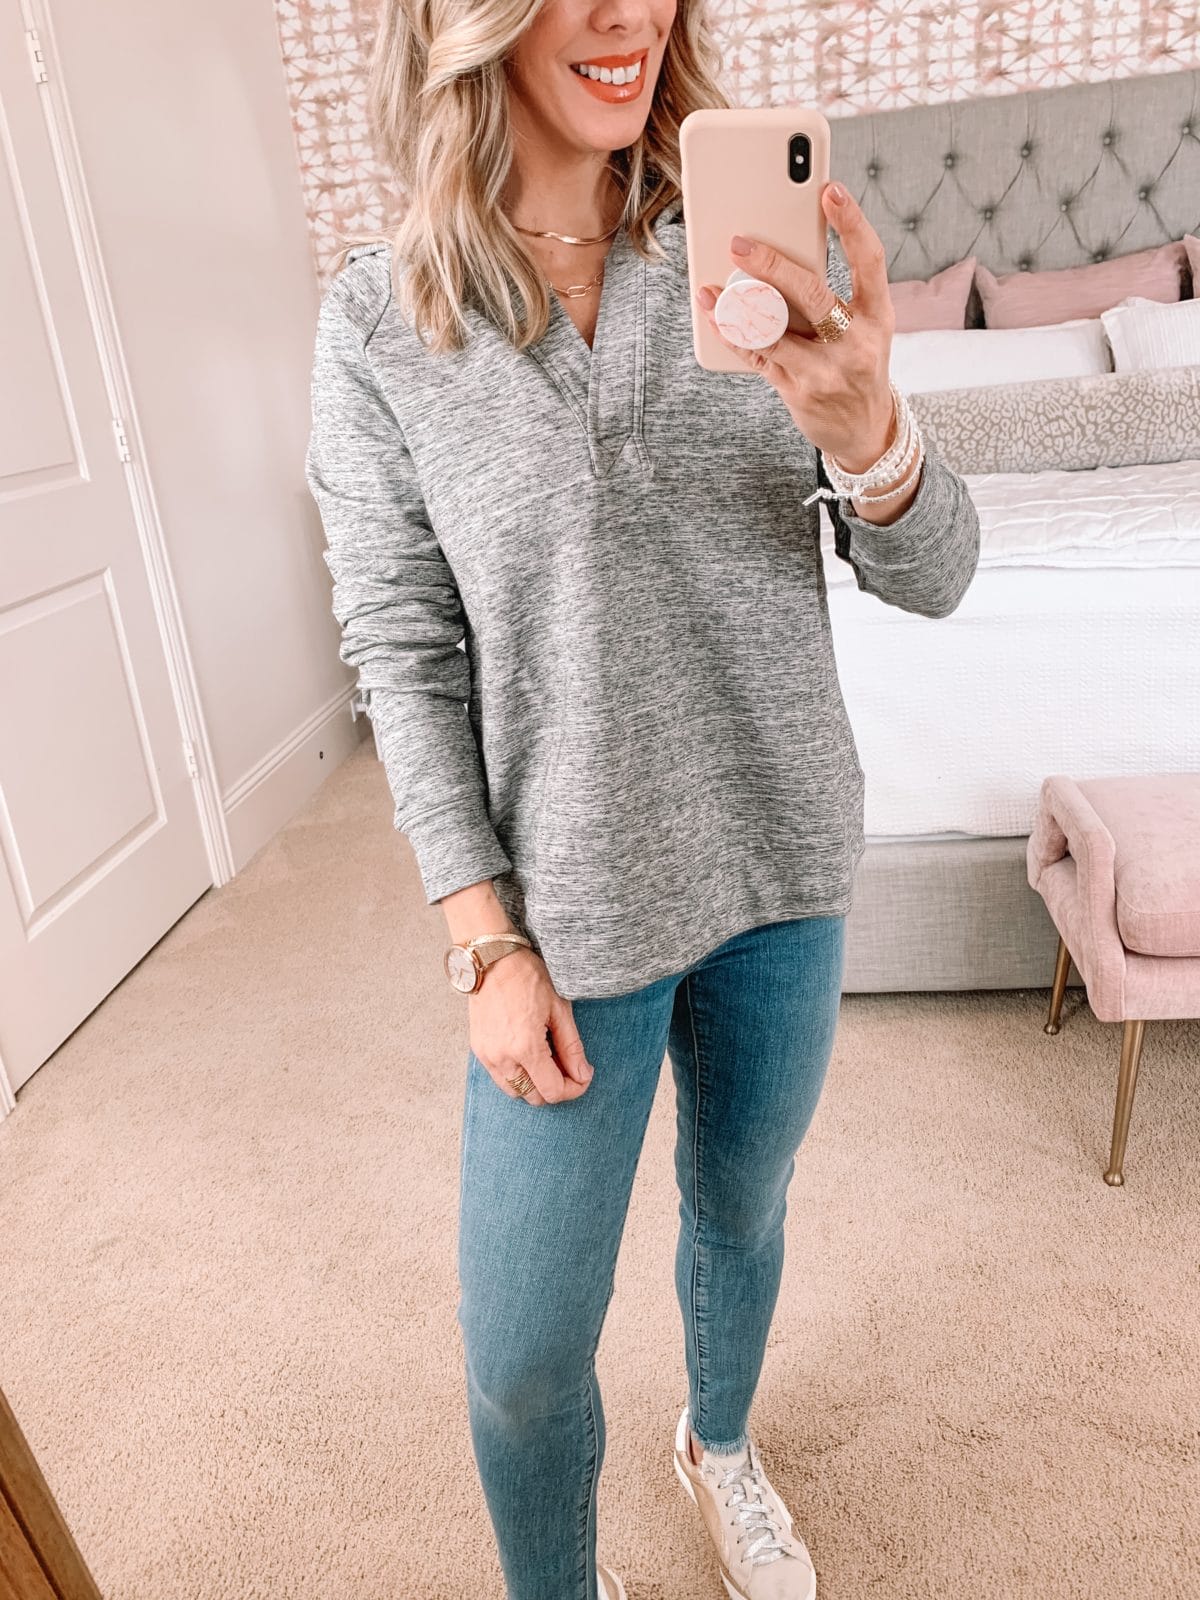 Amazon Fashion Faves, Pullover, Goodthreads Jeans, Sneakers 